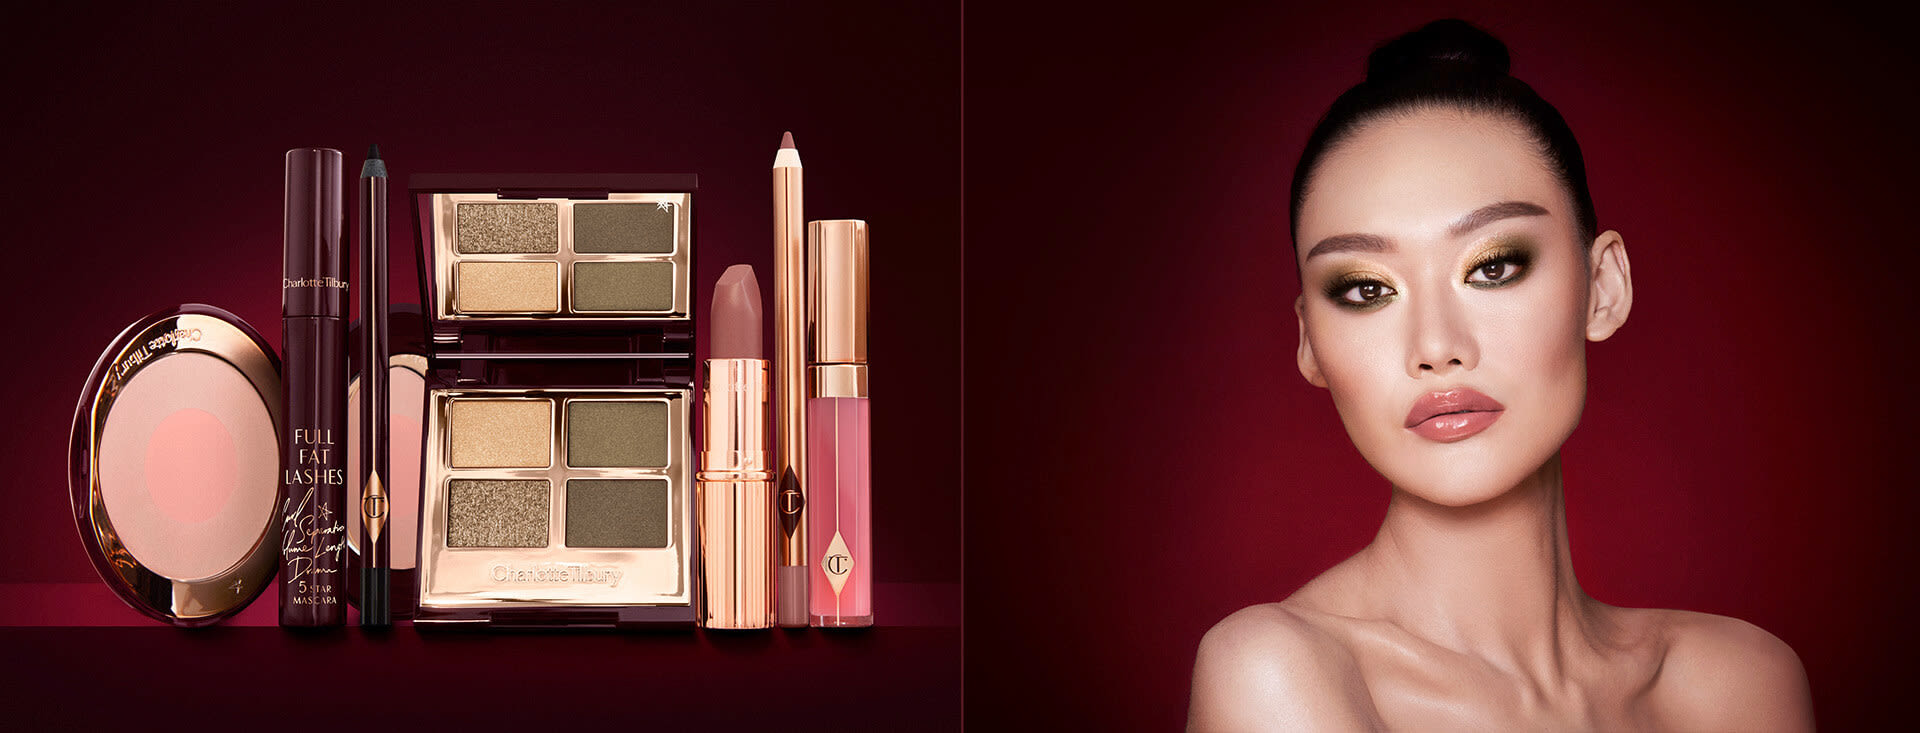 A fair-tone model with brown eyes wearing smokey green eye makeup with black eyeliner, soft brown blush, and nude brown lipstick, along with a quad eyeshadow palette in shades of green and gold, a brown eyeliner pencil, mascara, an open two-tone blush in nude pink, a warm pink lip liner pencil, a warm rose lipstick, and a bright pink lip gloss. 